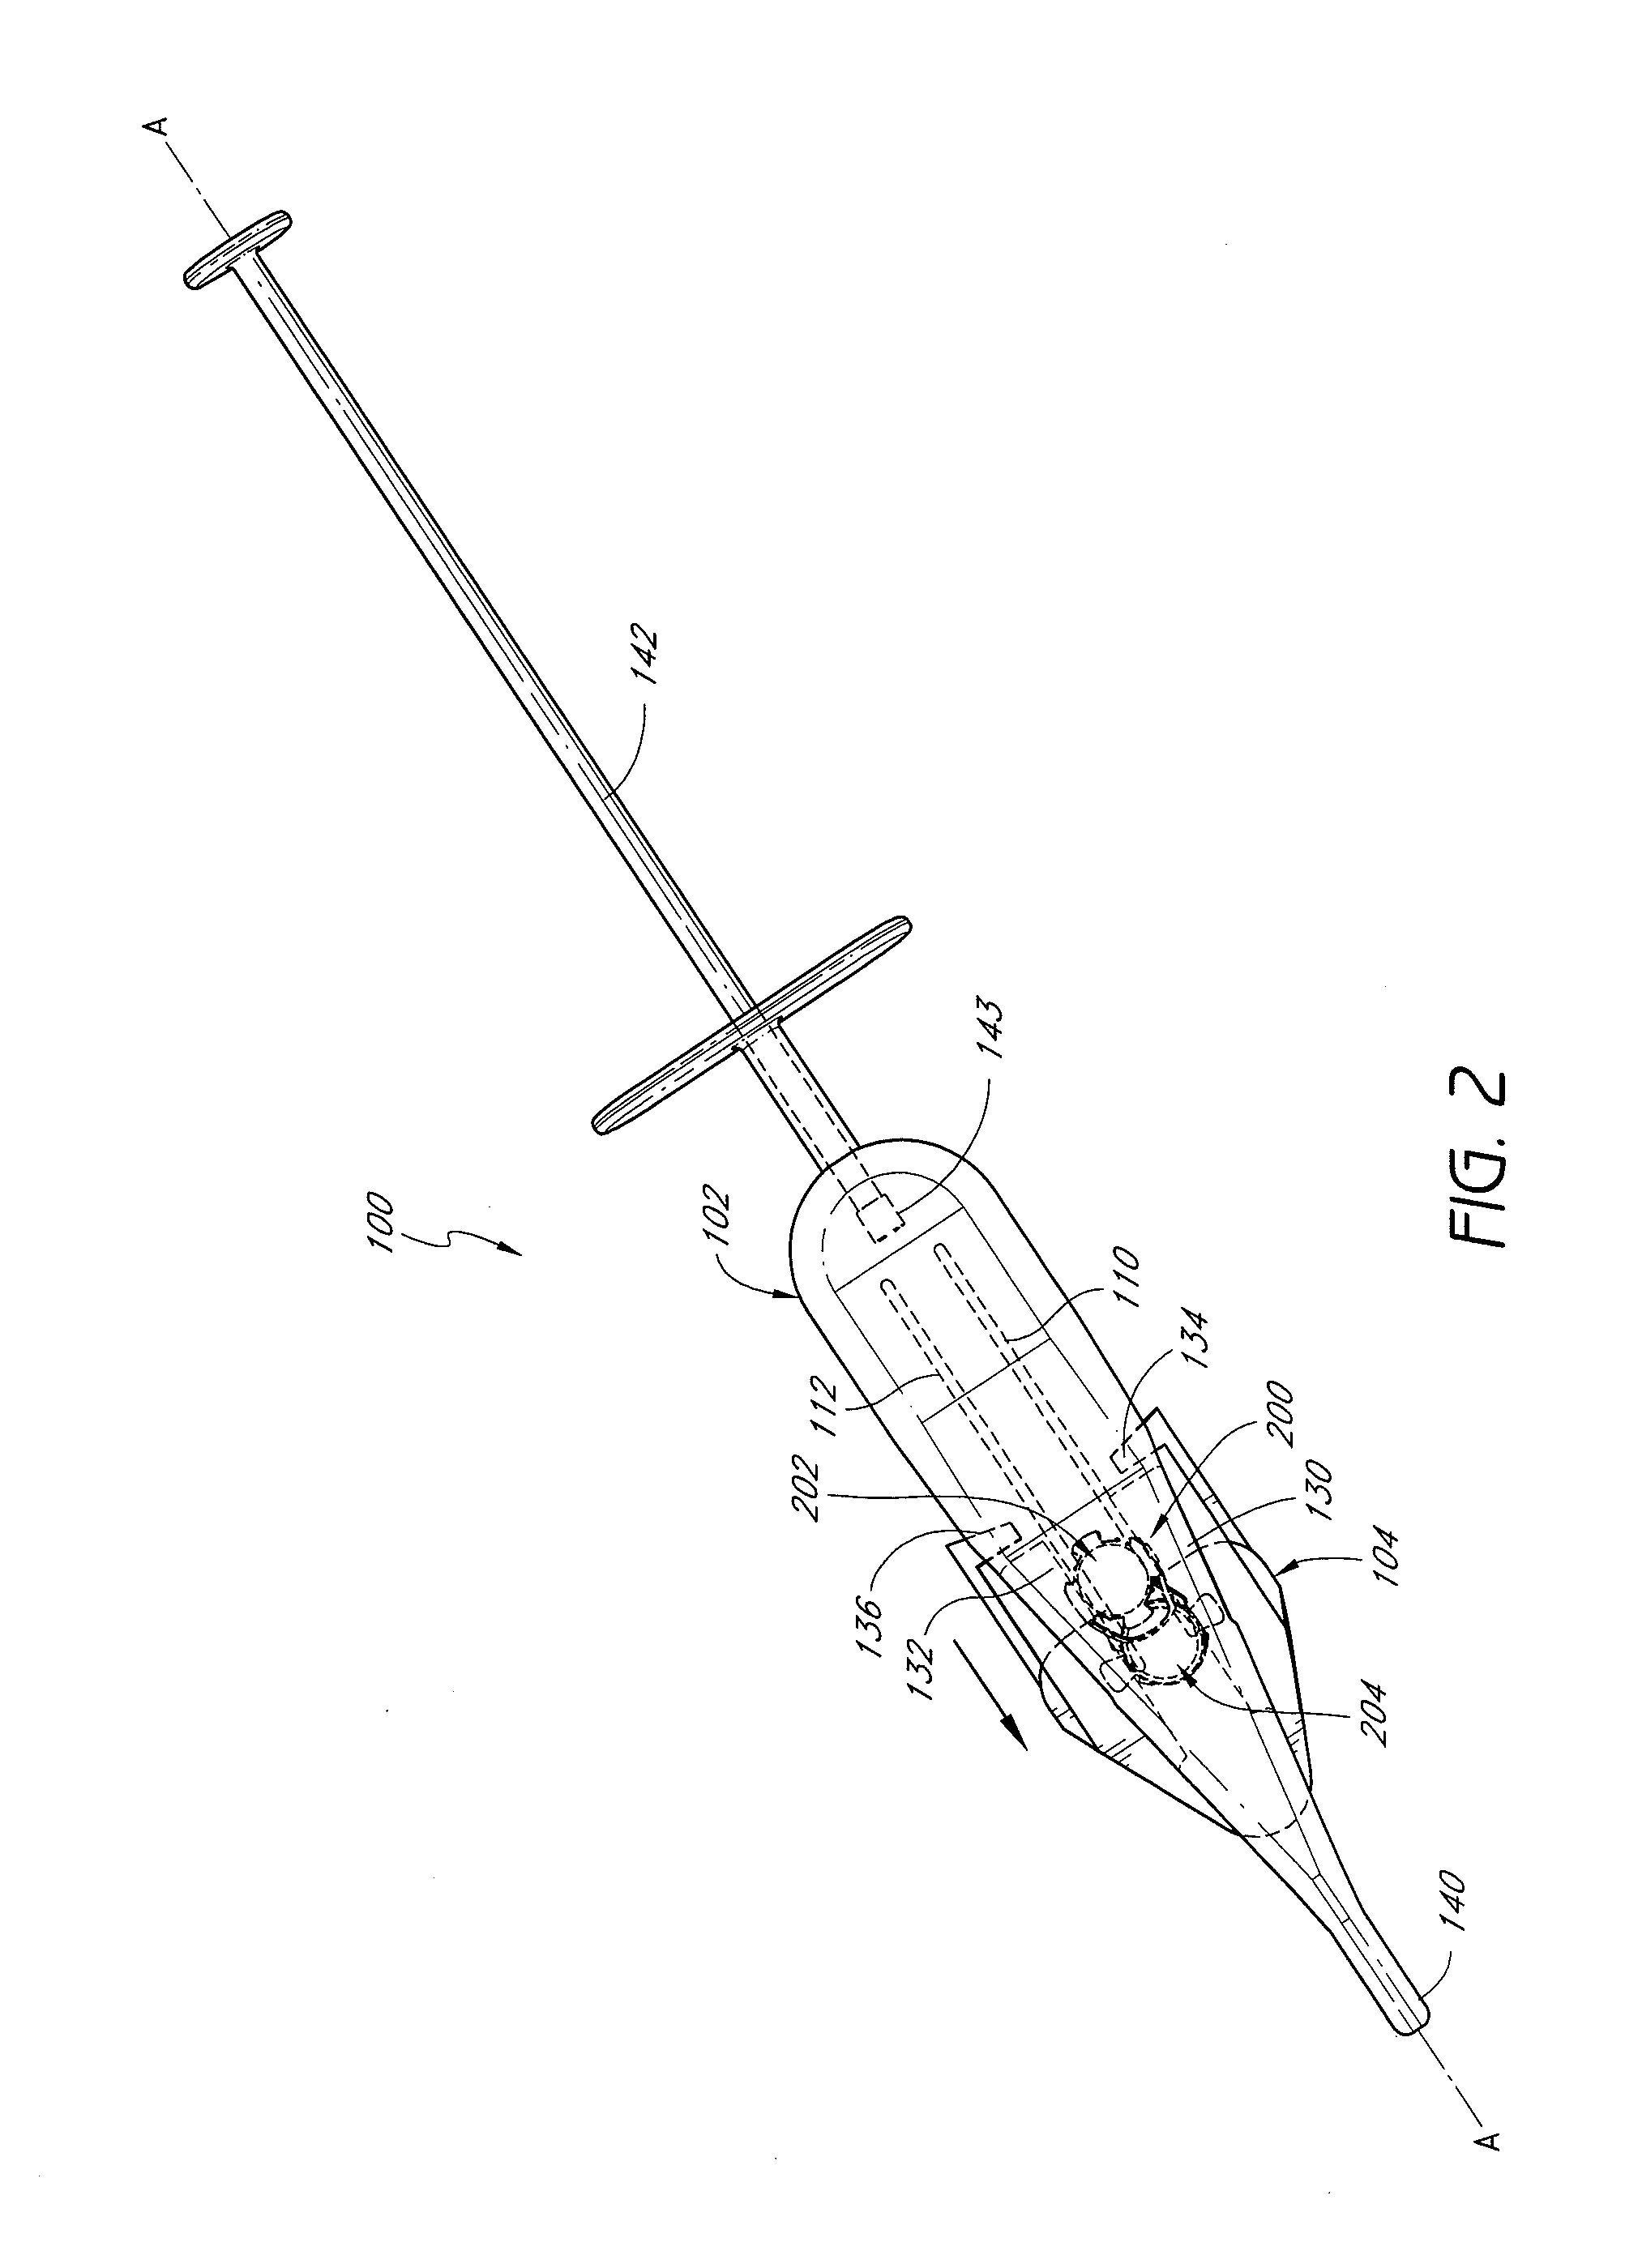 Injector for intraocular lens system